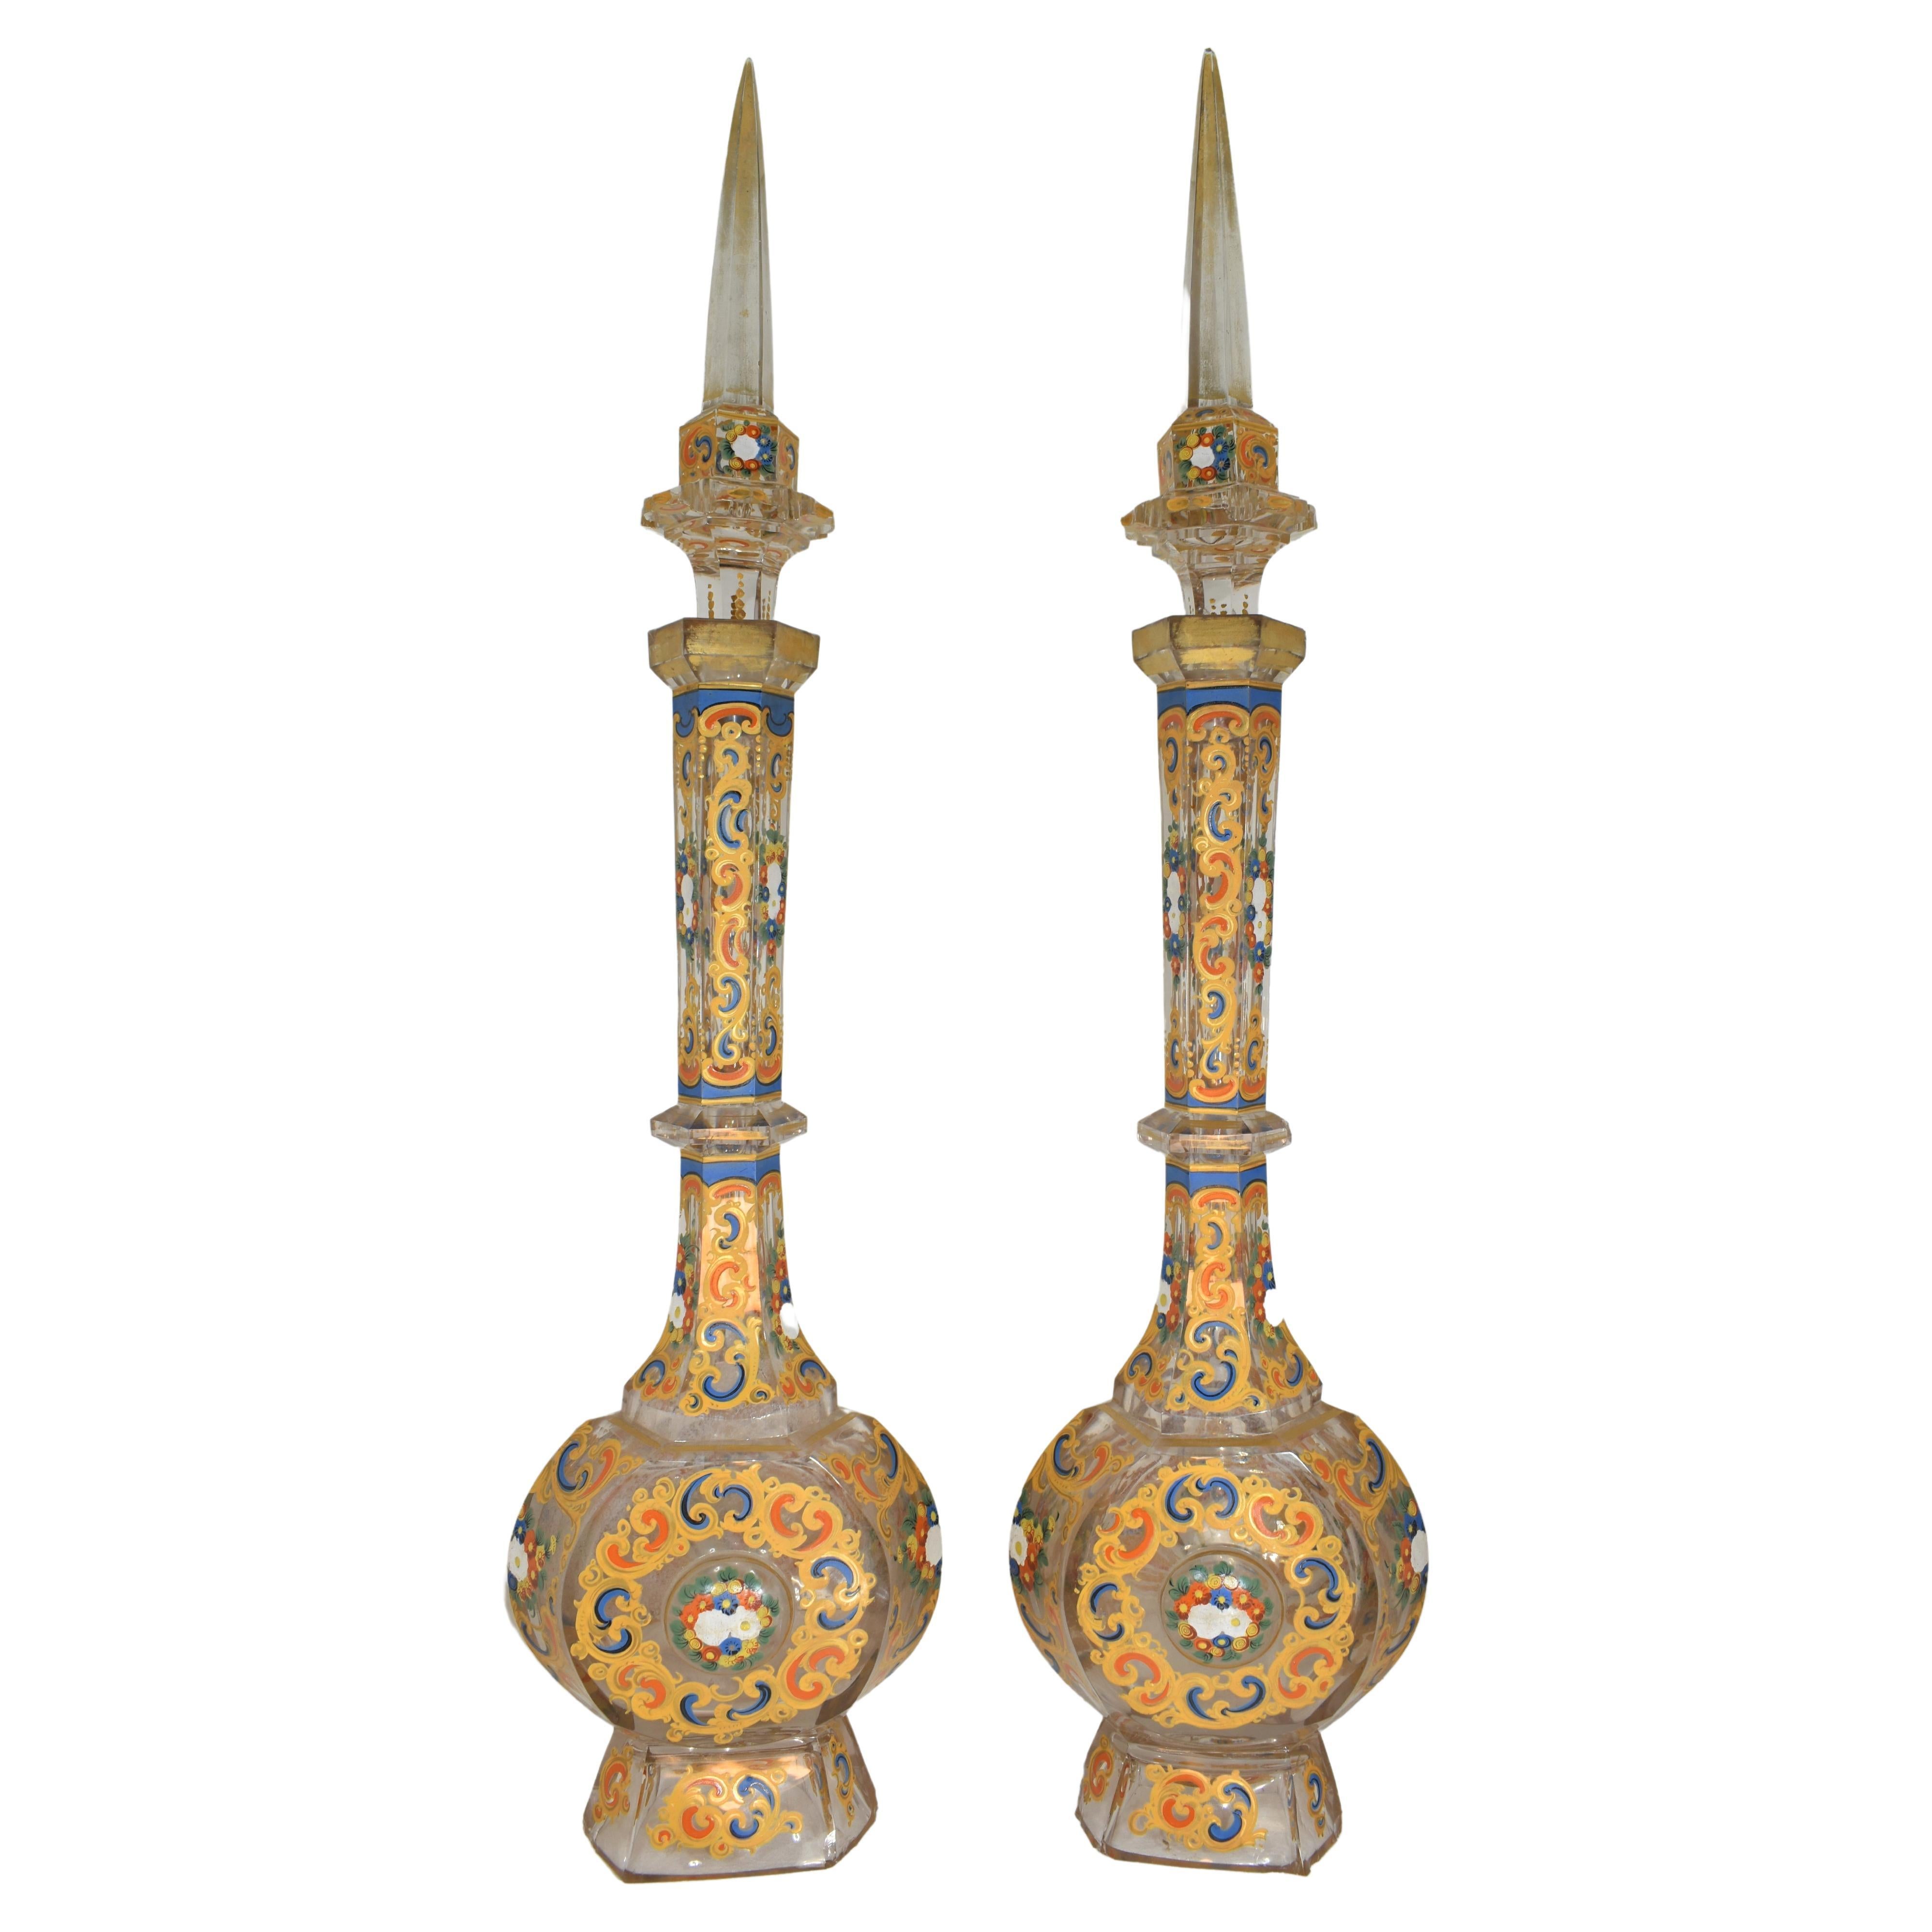 Pair of Enamelled Cut-Glass Decanters, Bohemian for Ottoman Market 19th Century For Sale